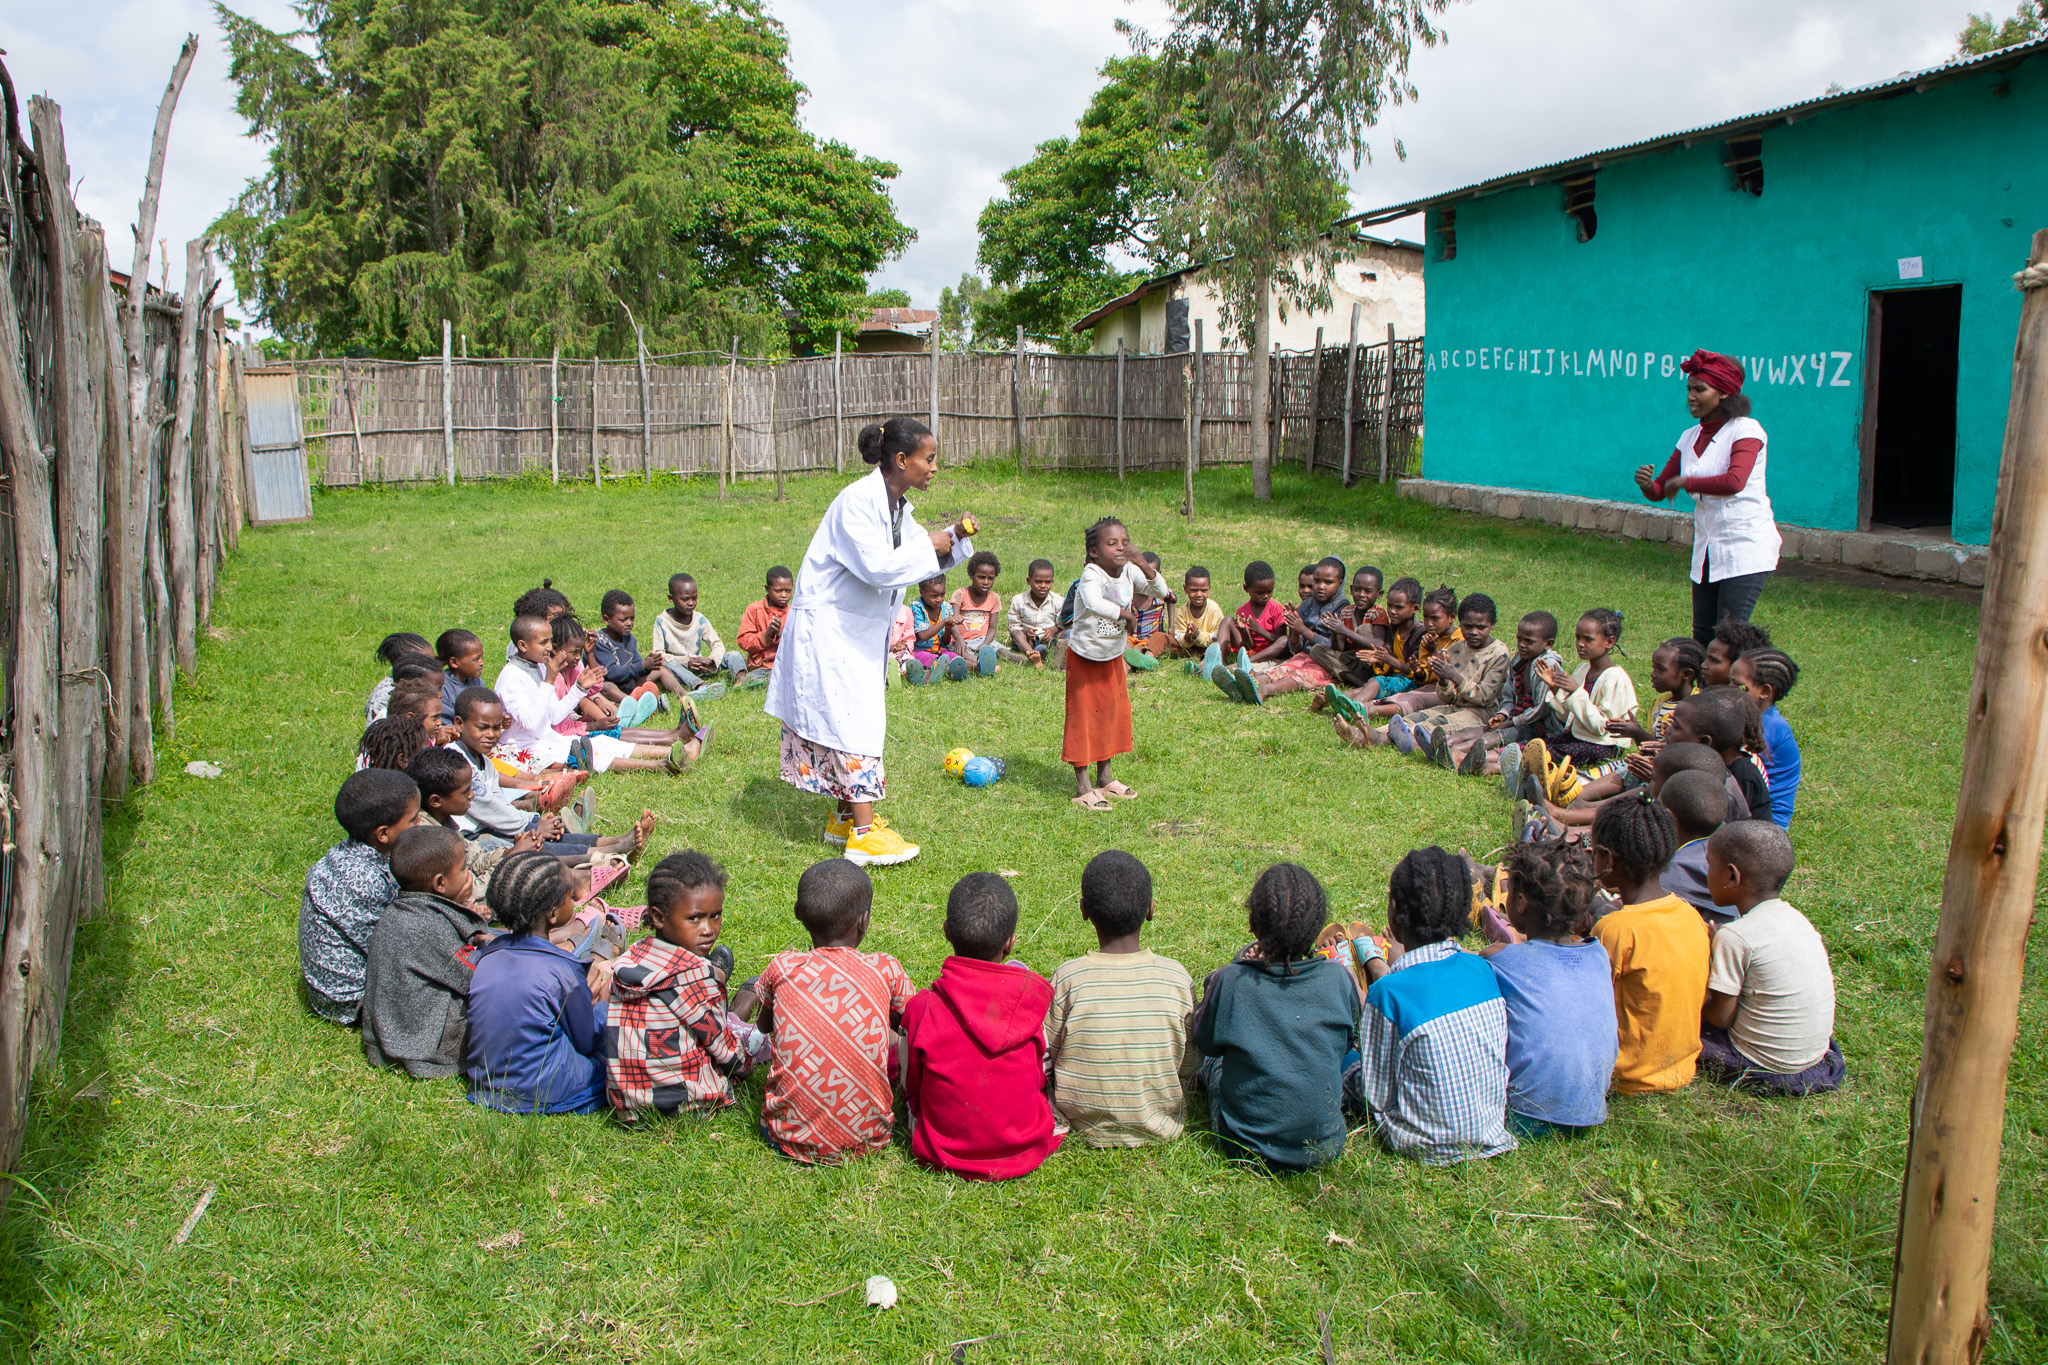 Asnakech Tadesse (L) and Askalech Maloro (R), Preprimary school teachers leading children play session.